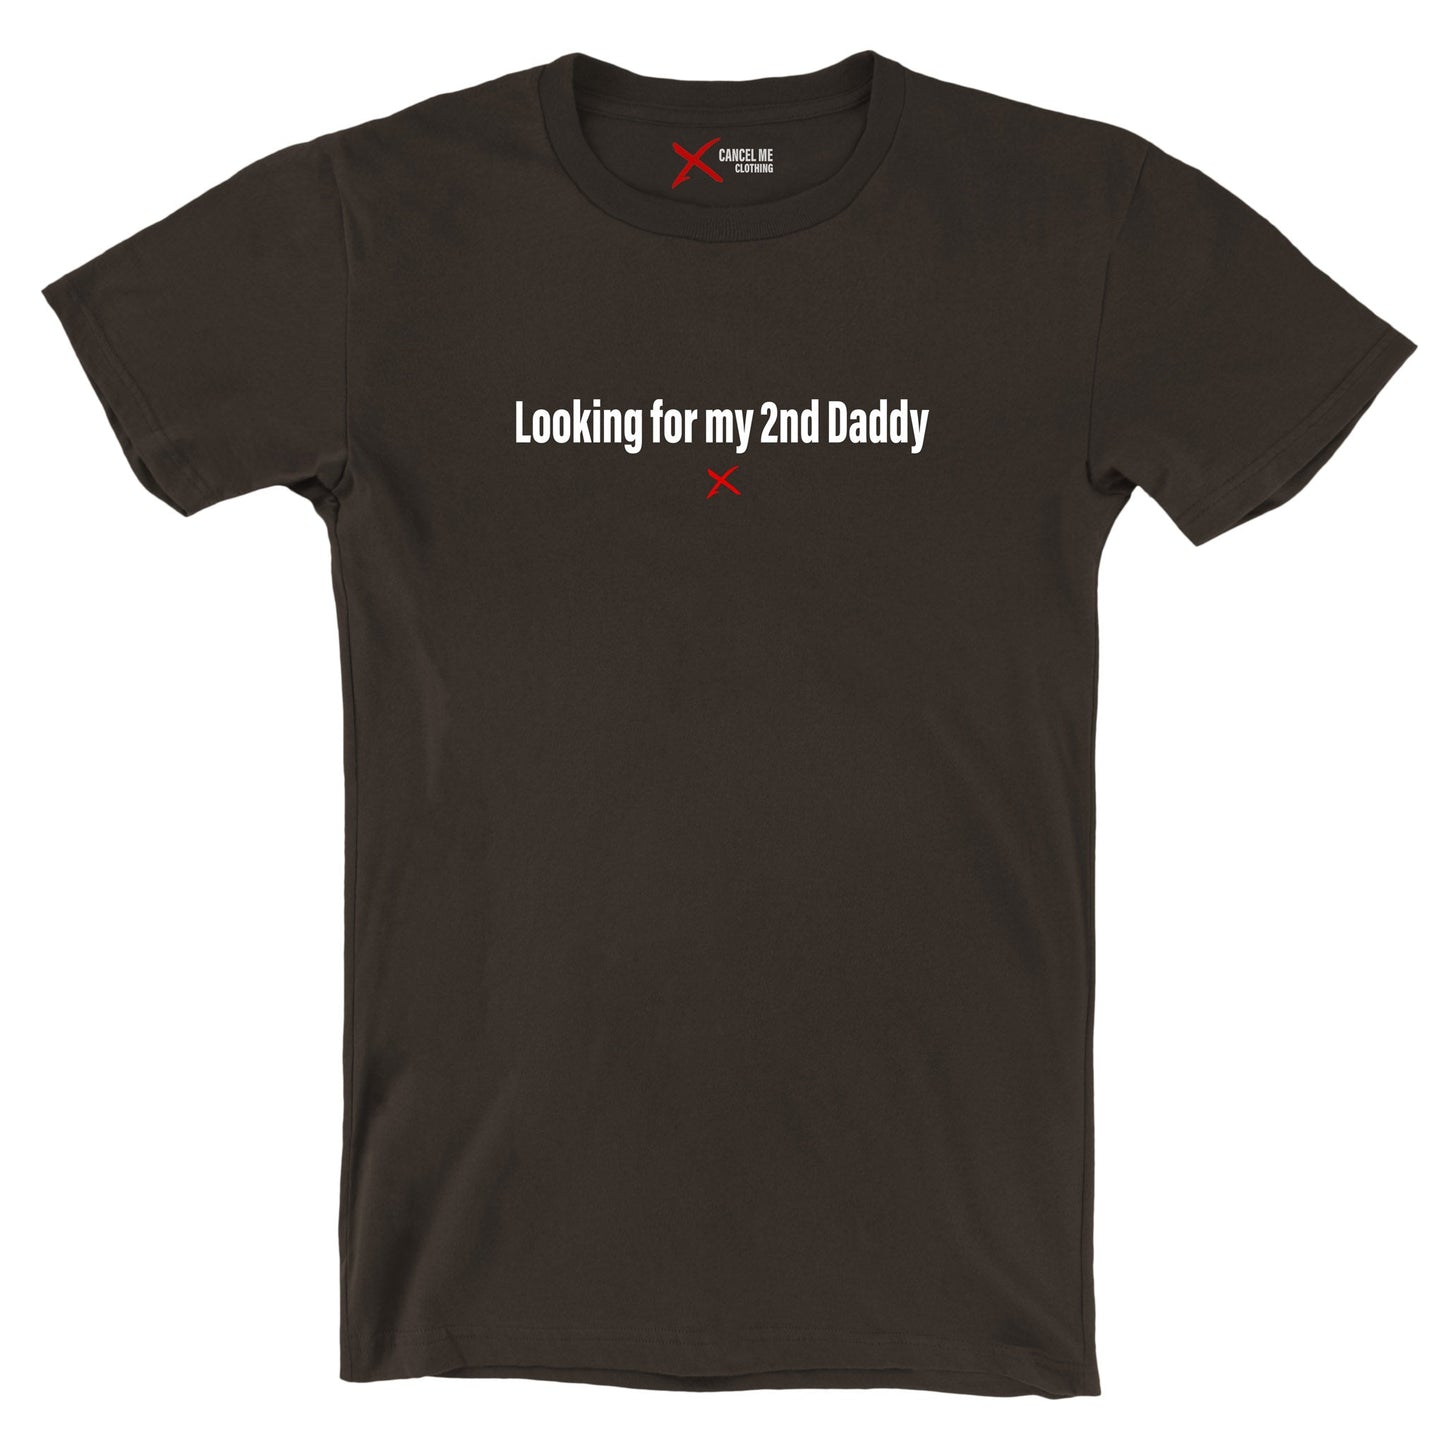 Looking for my 2nd Daddy - Shirt